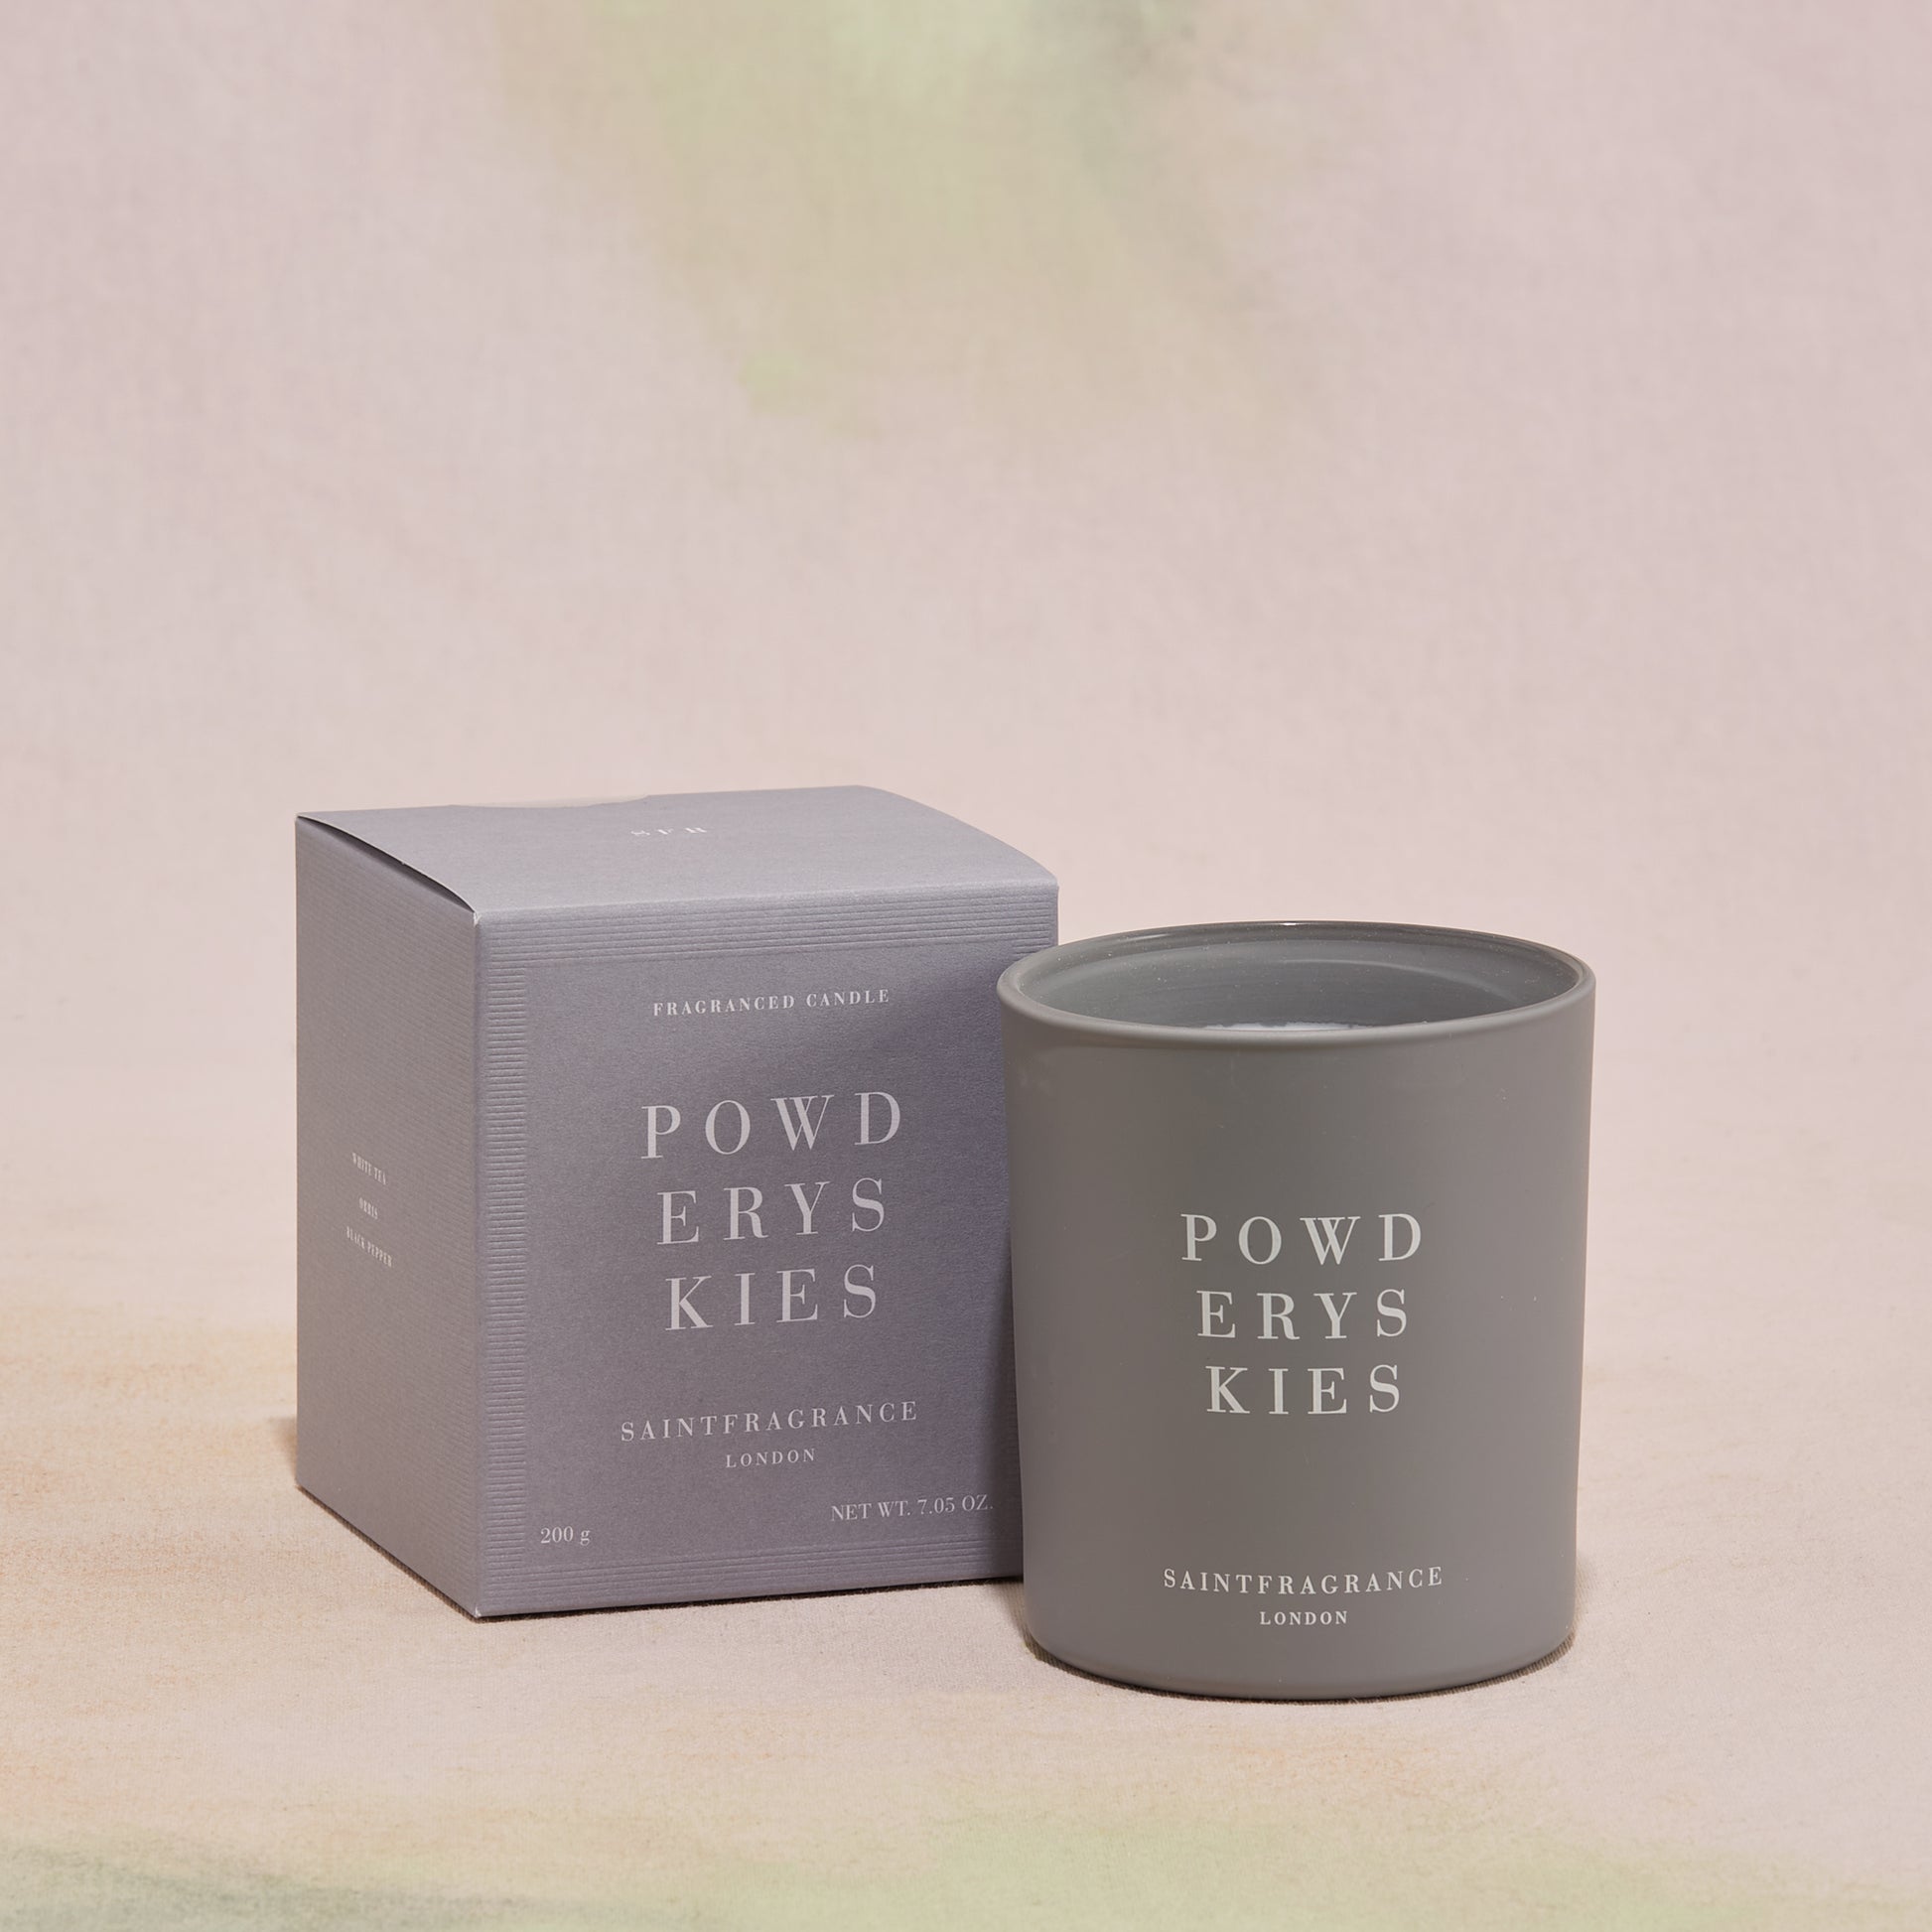 Wild at Heart - Saint Fragrance Powdery Skies Candle